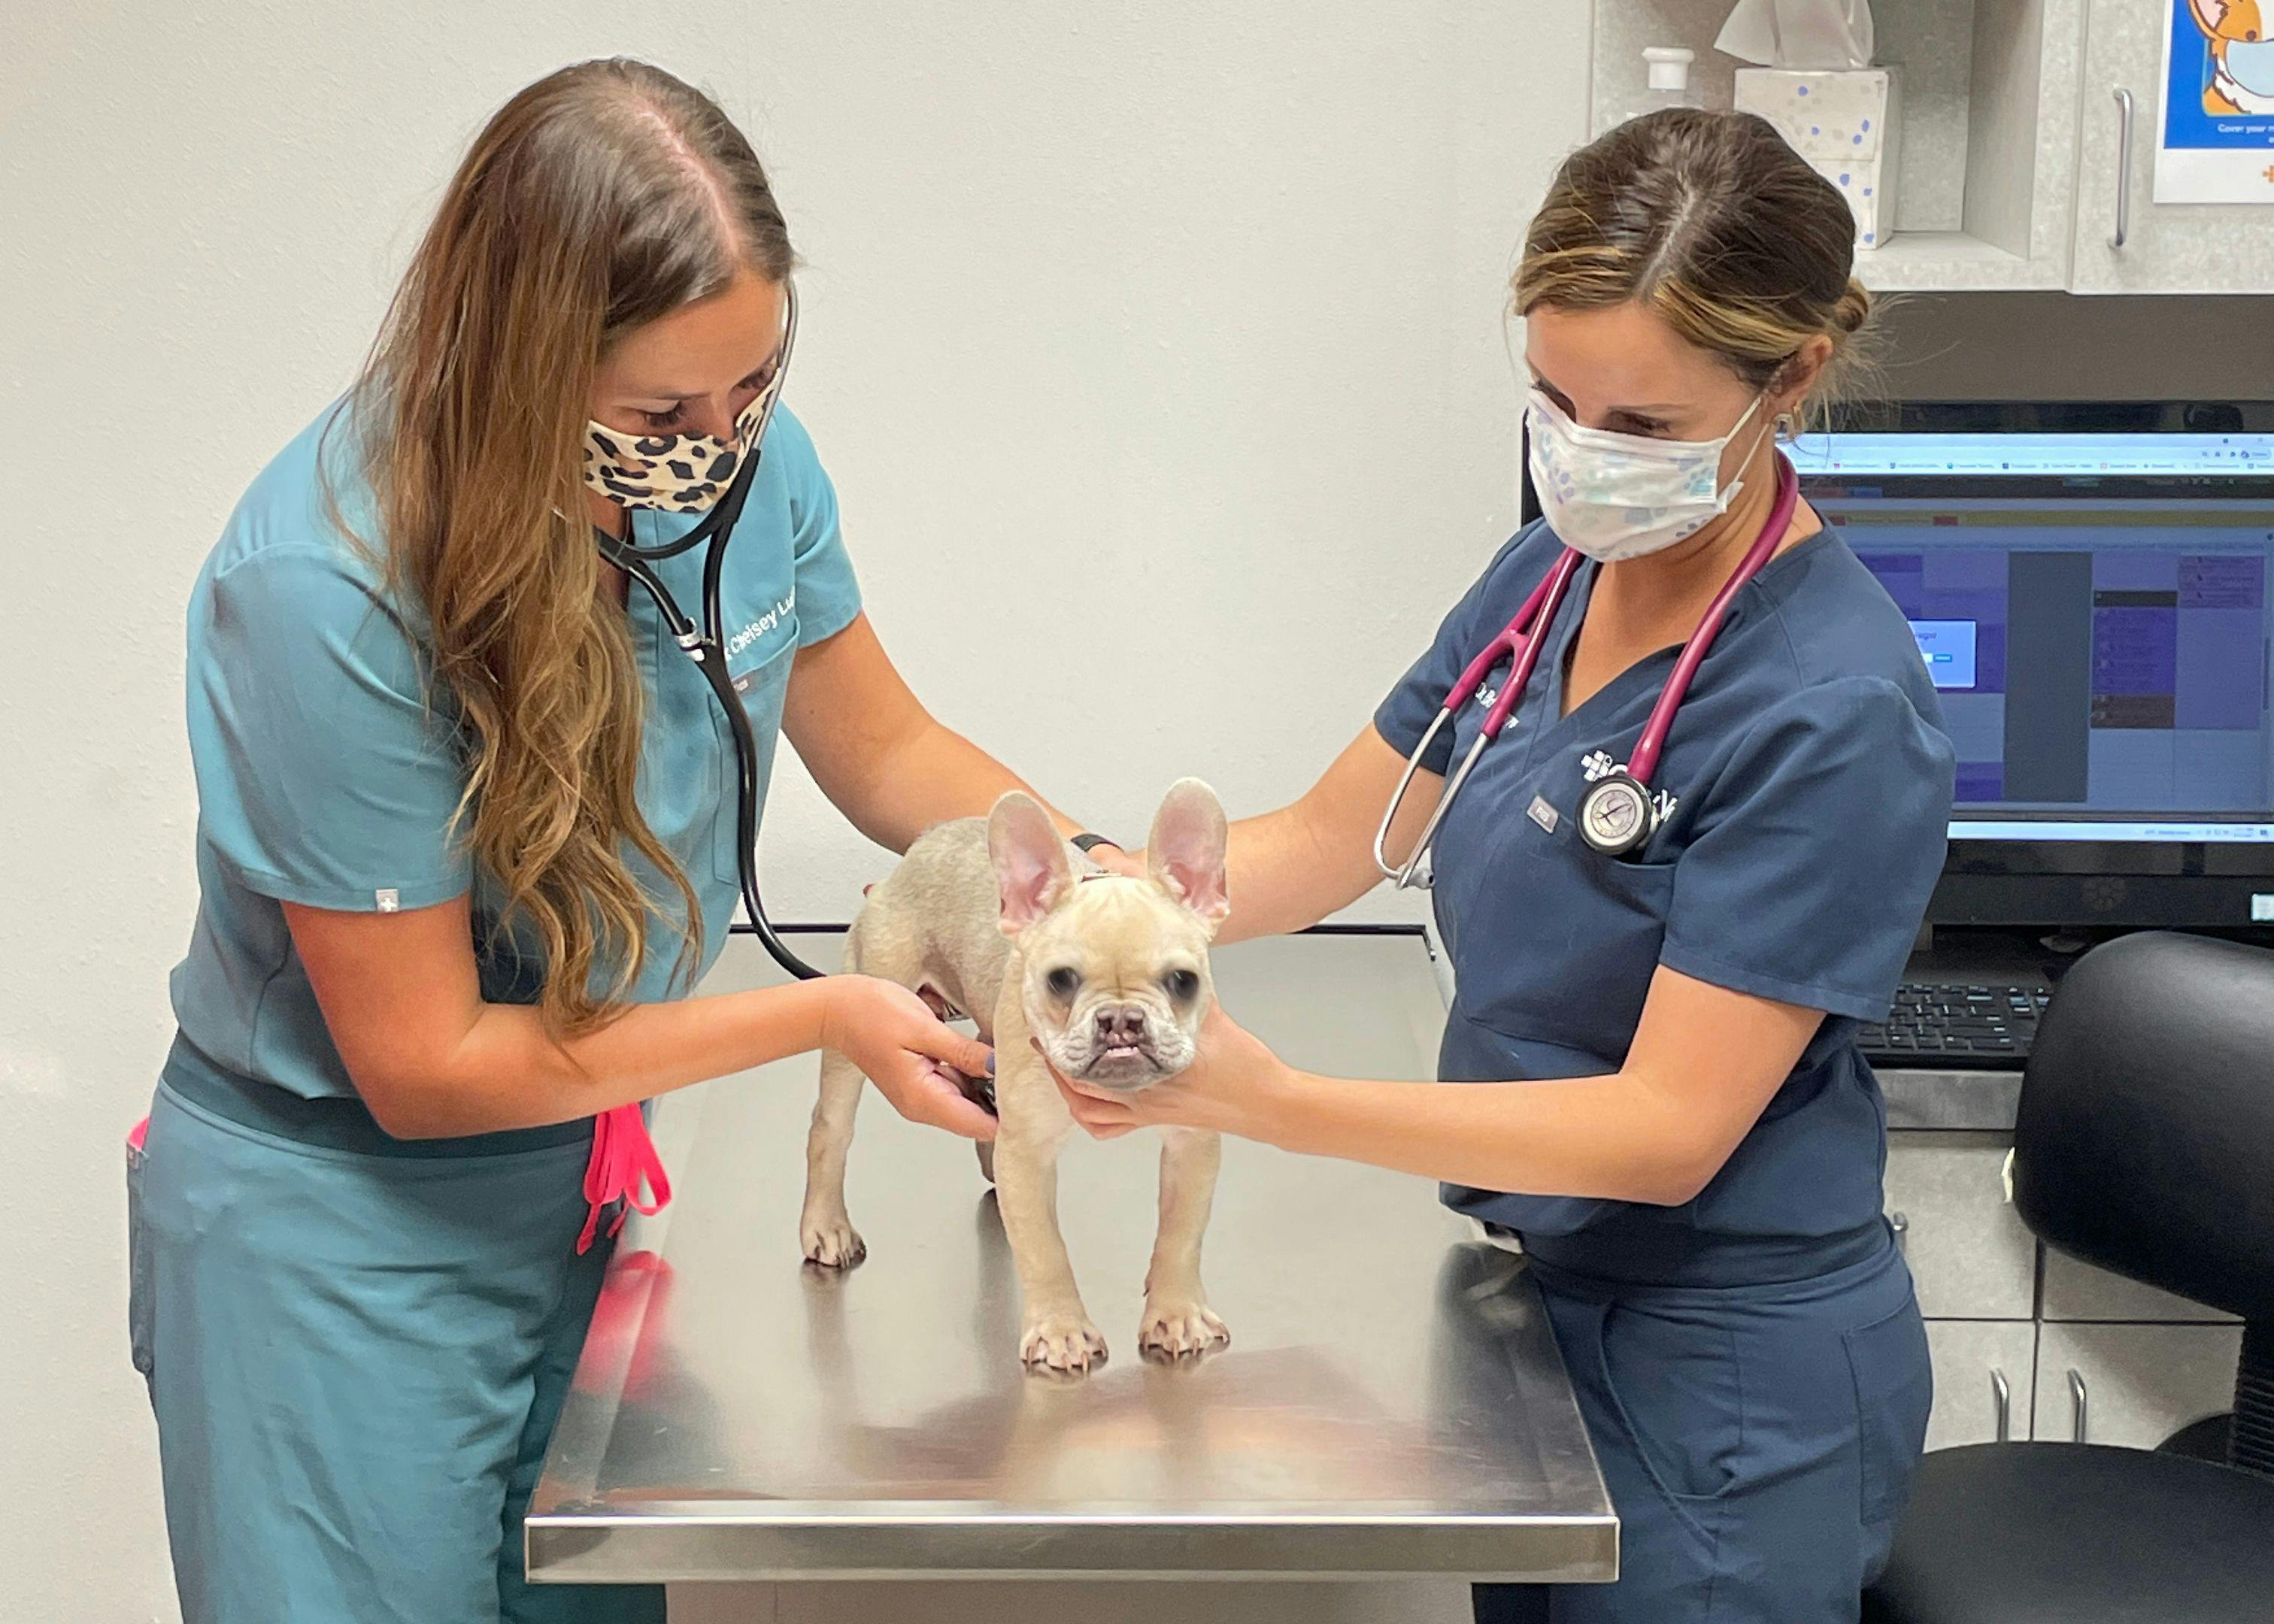 Clinic center: Recent veterinary health facilities opening across North America